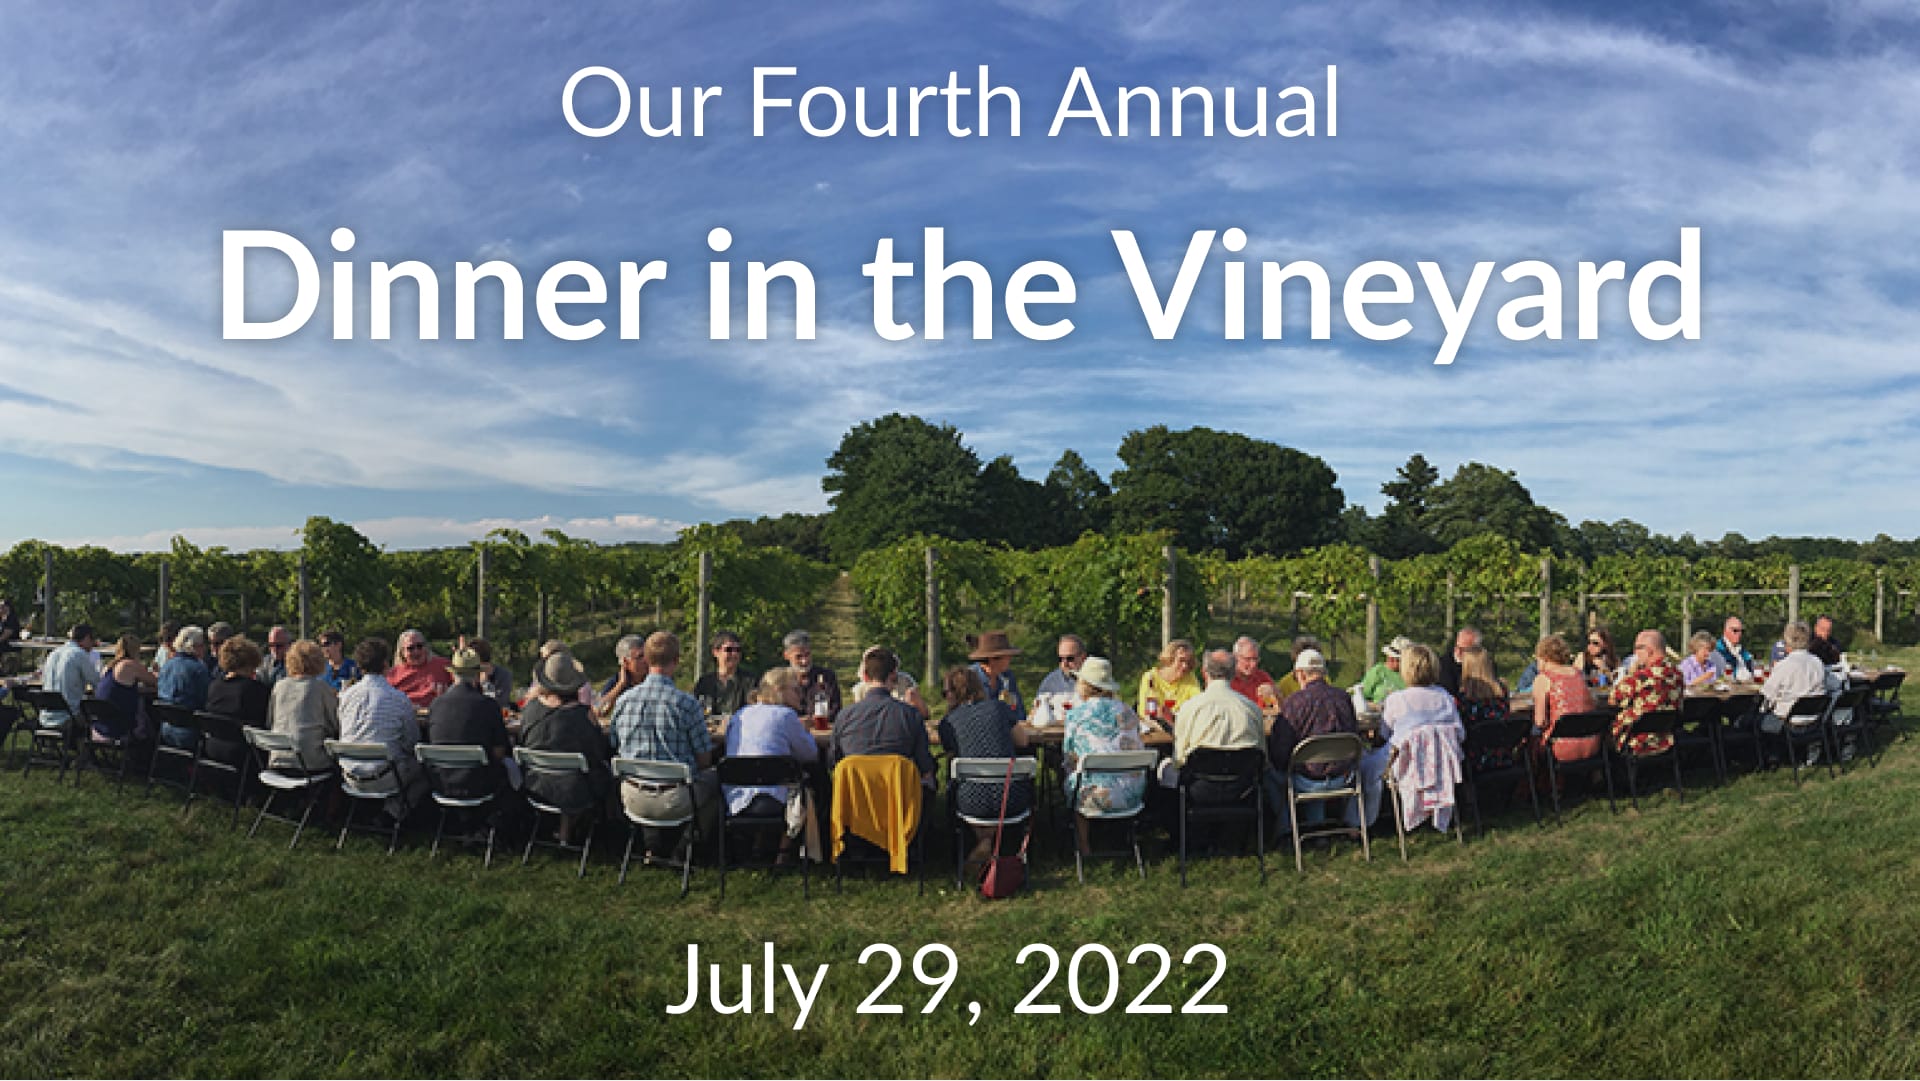 People seated at a long table in front of vineyard. Text reads: "Our Fourth Annual Dinner in the Vineyard, July 29, 2022"